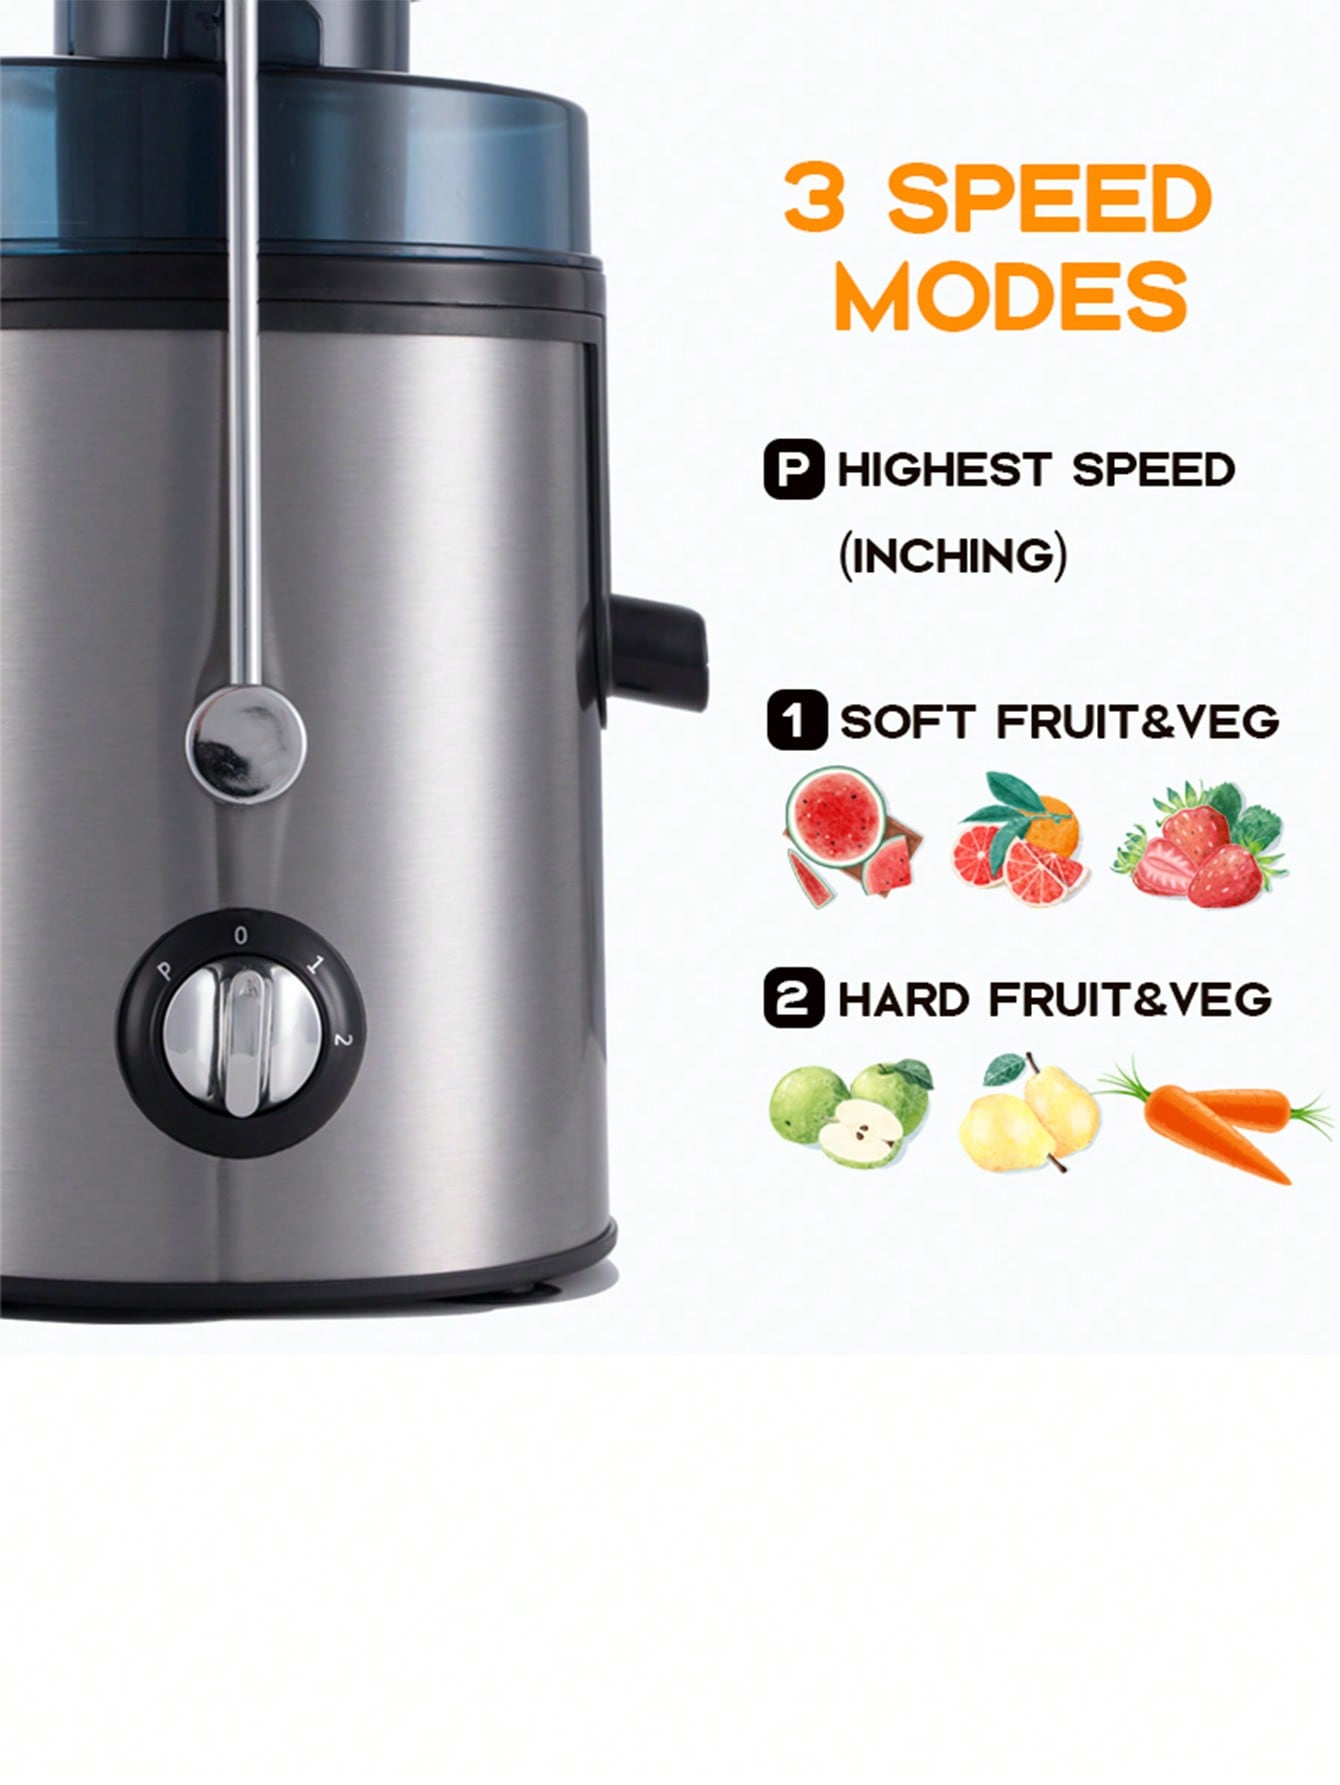 1pc Uk Standard Easy-clean Juicer, Pulp Separation Design, 400w High Power, 65cm Wide Feeder Chute, 450ml Juice Cup, Free Cleaning Brush Included--4